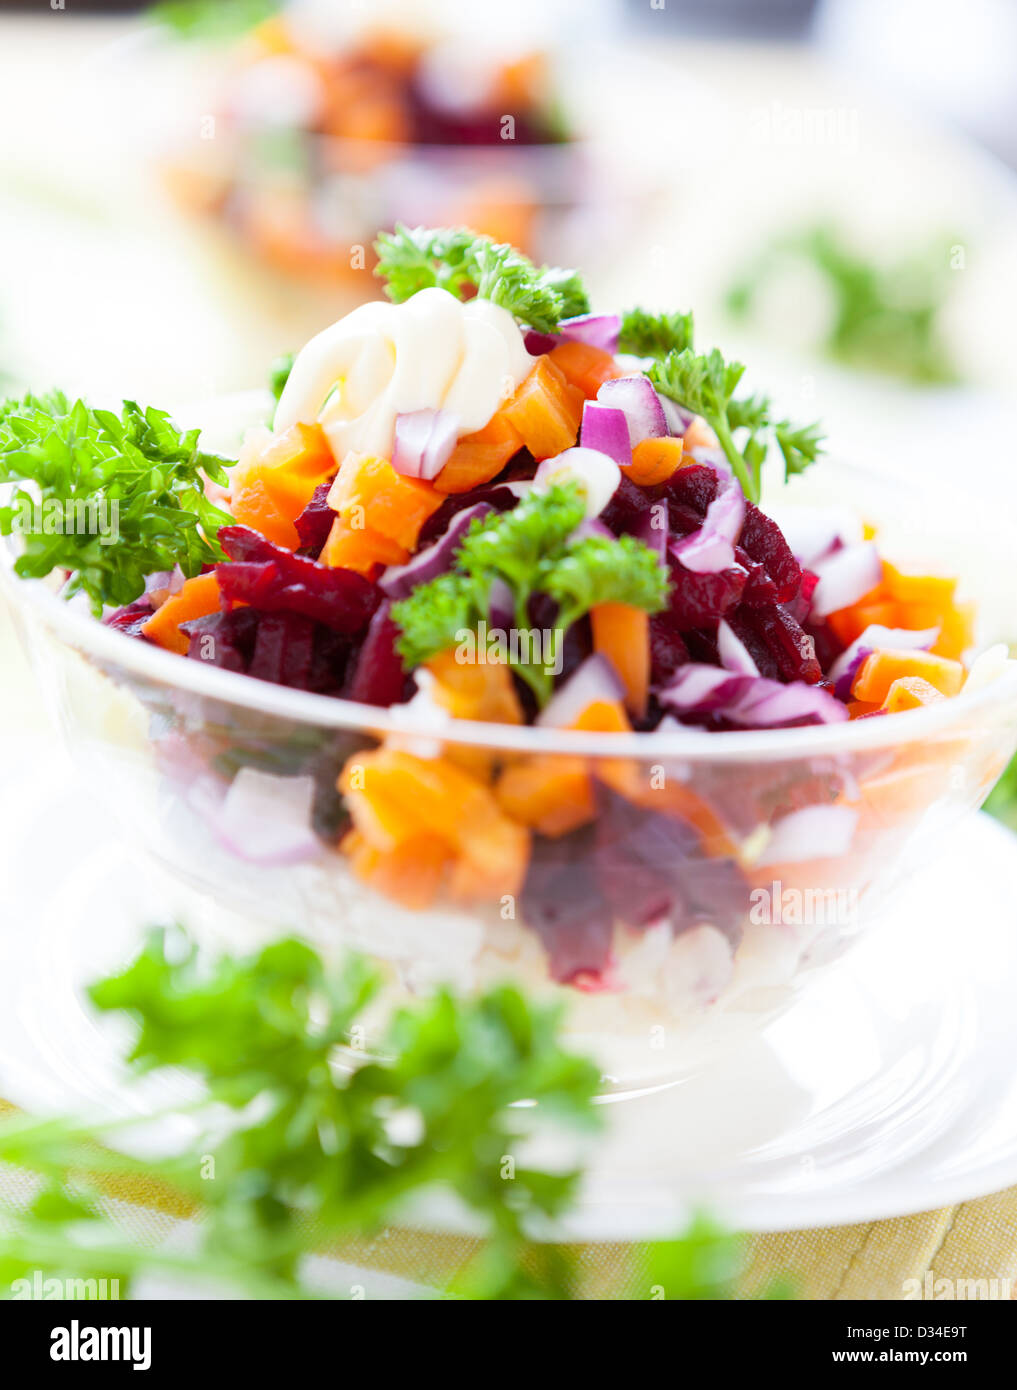 light salad with carrots and beets, closeup Stock Photo